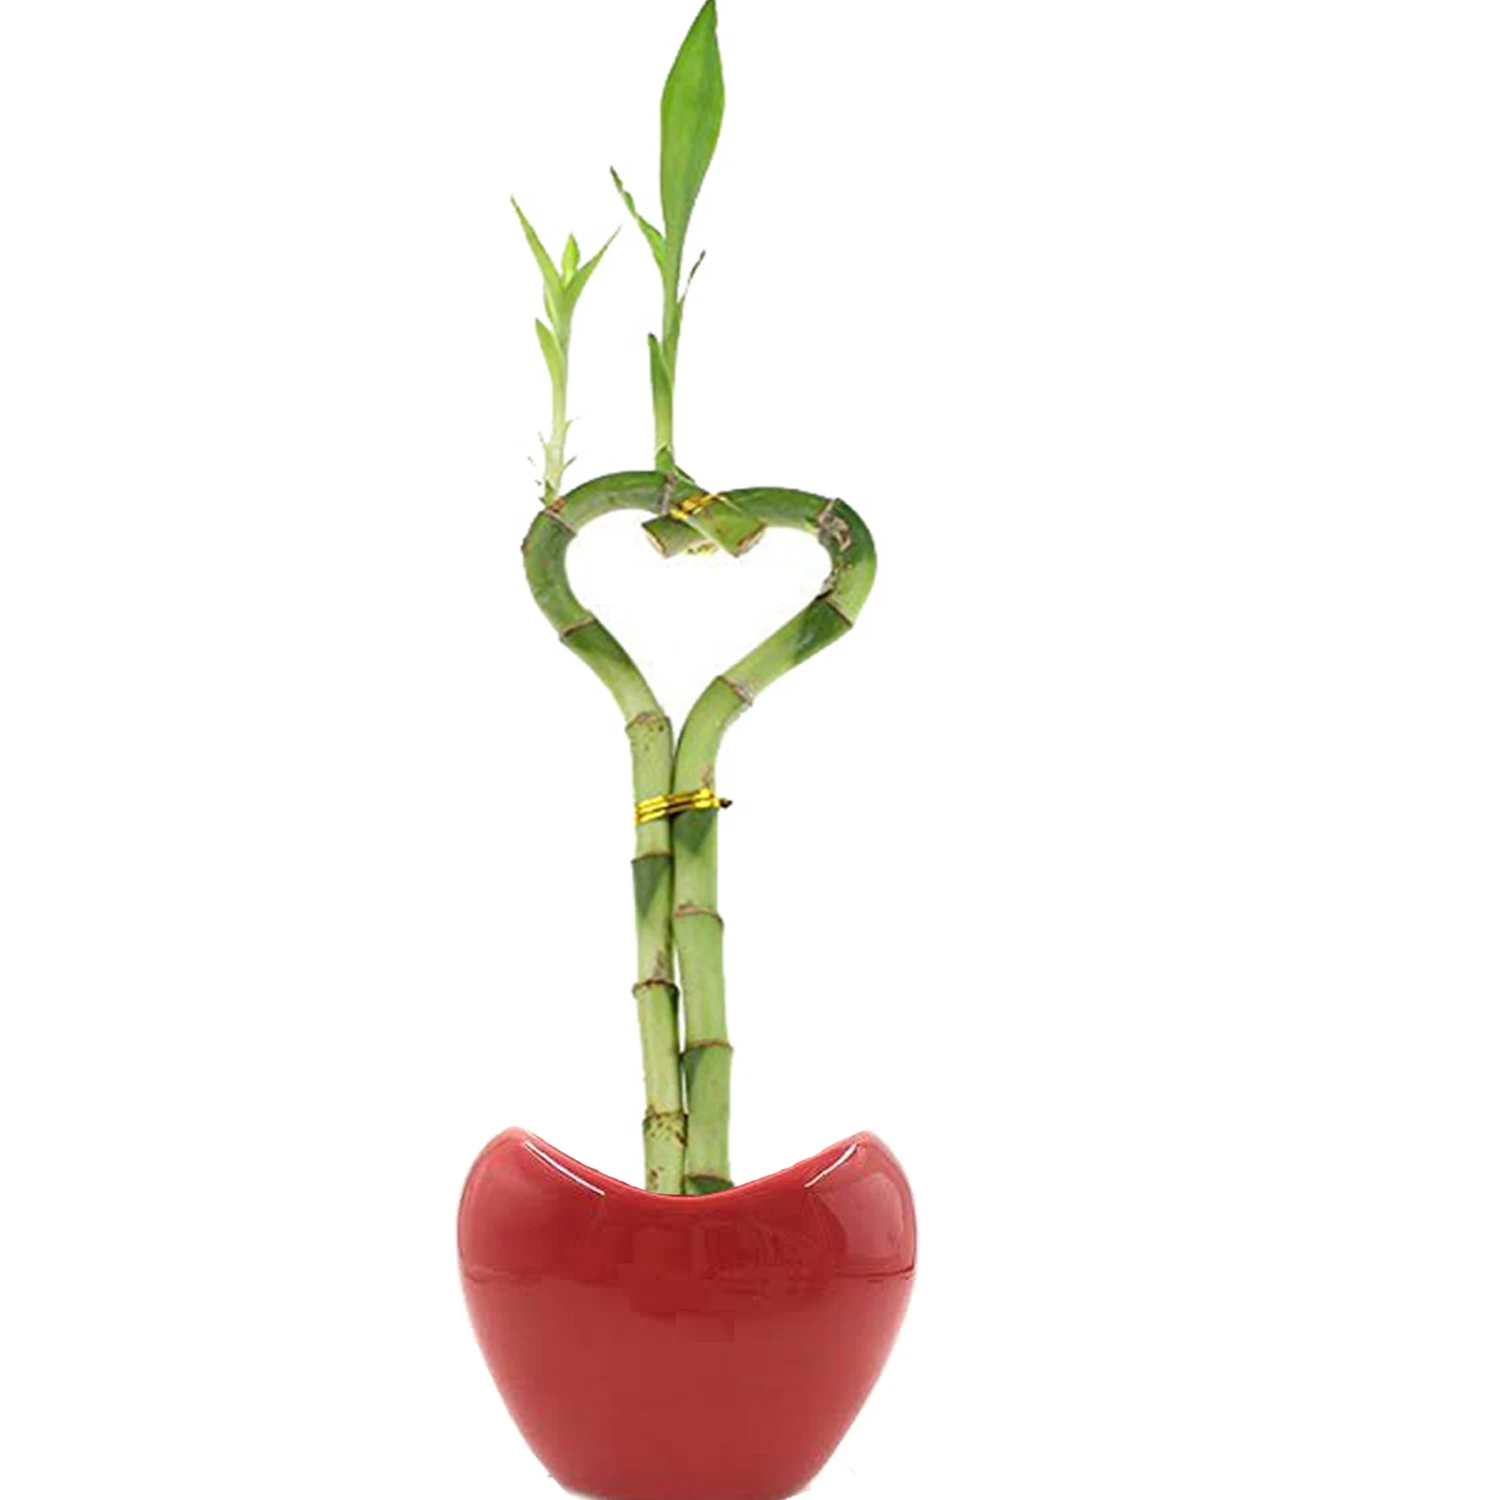 wholesales braided heart shape spiral lucky bamboo (62137037260)